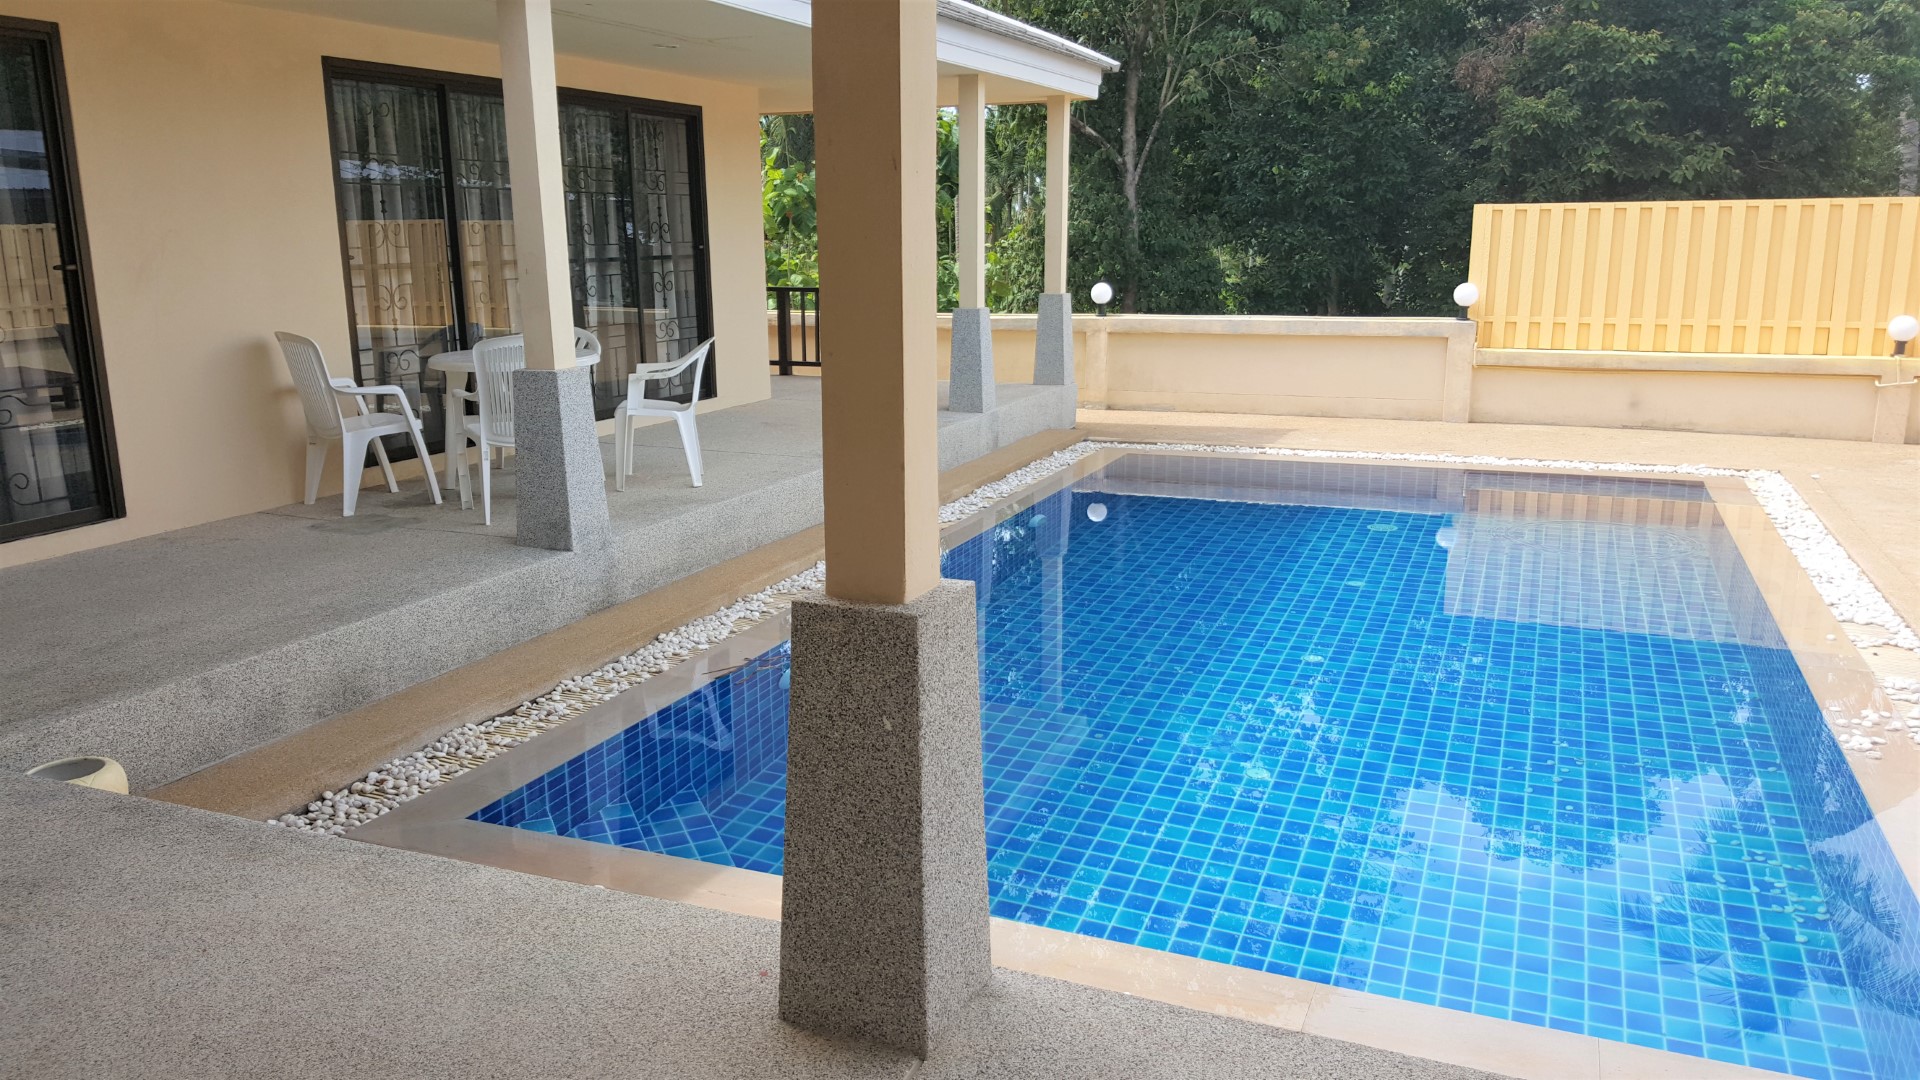 2-bedroom villa with private pool